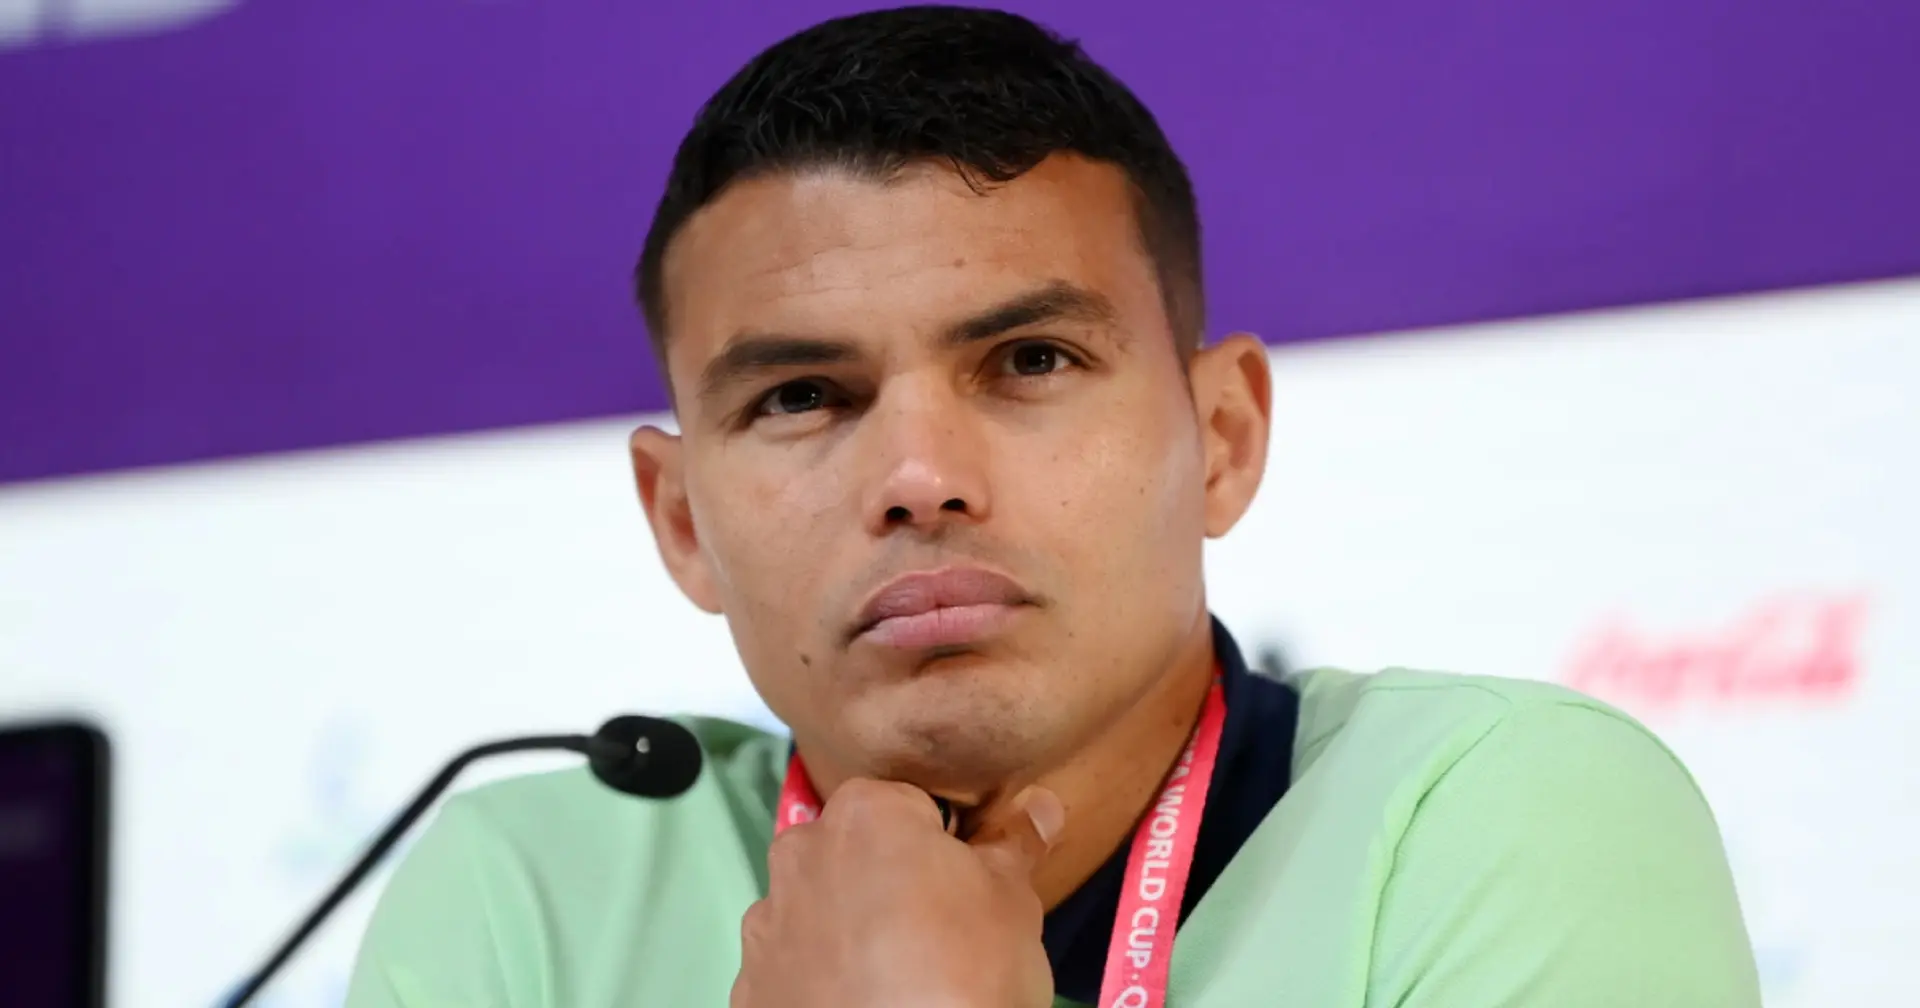 'We truly believe': Thiago Silva insists Brazil are favourites to win World Cup